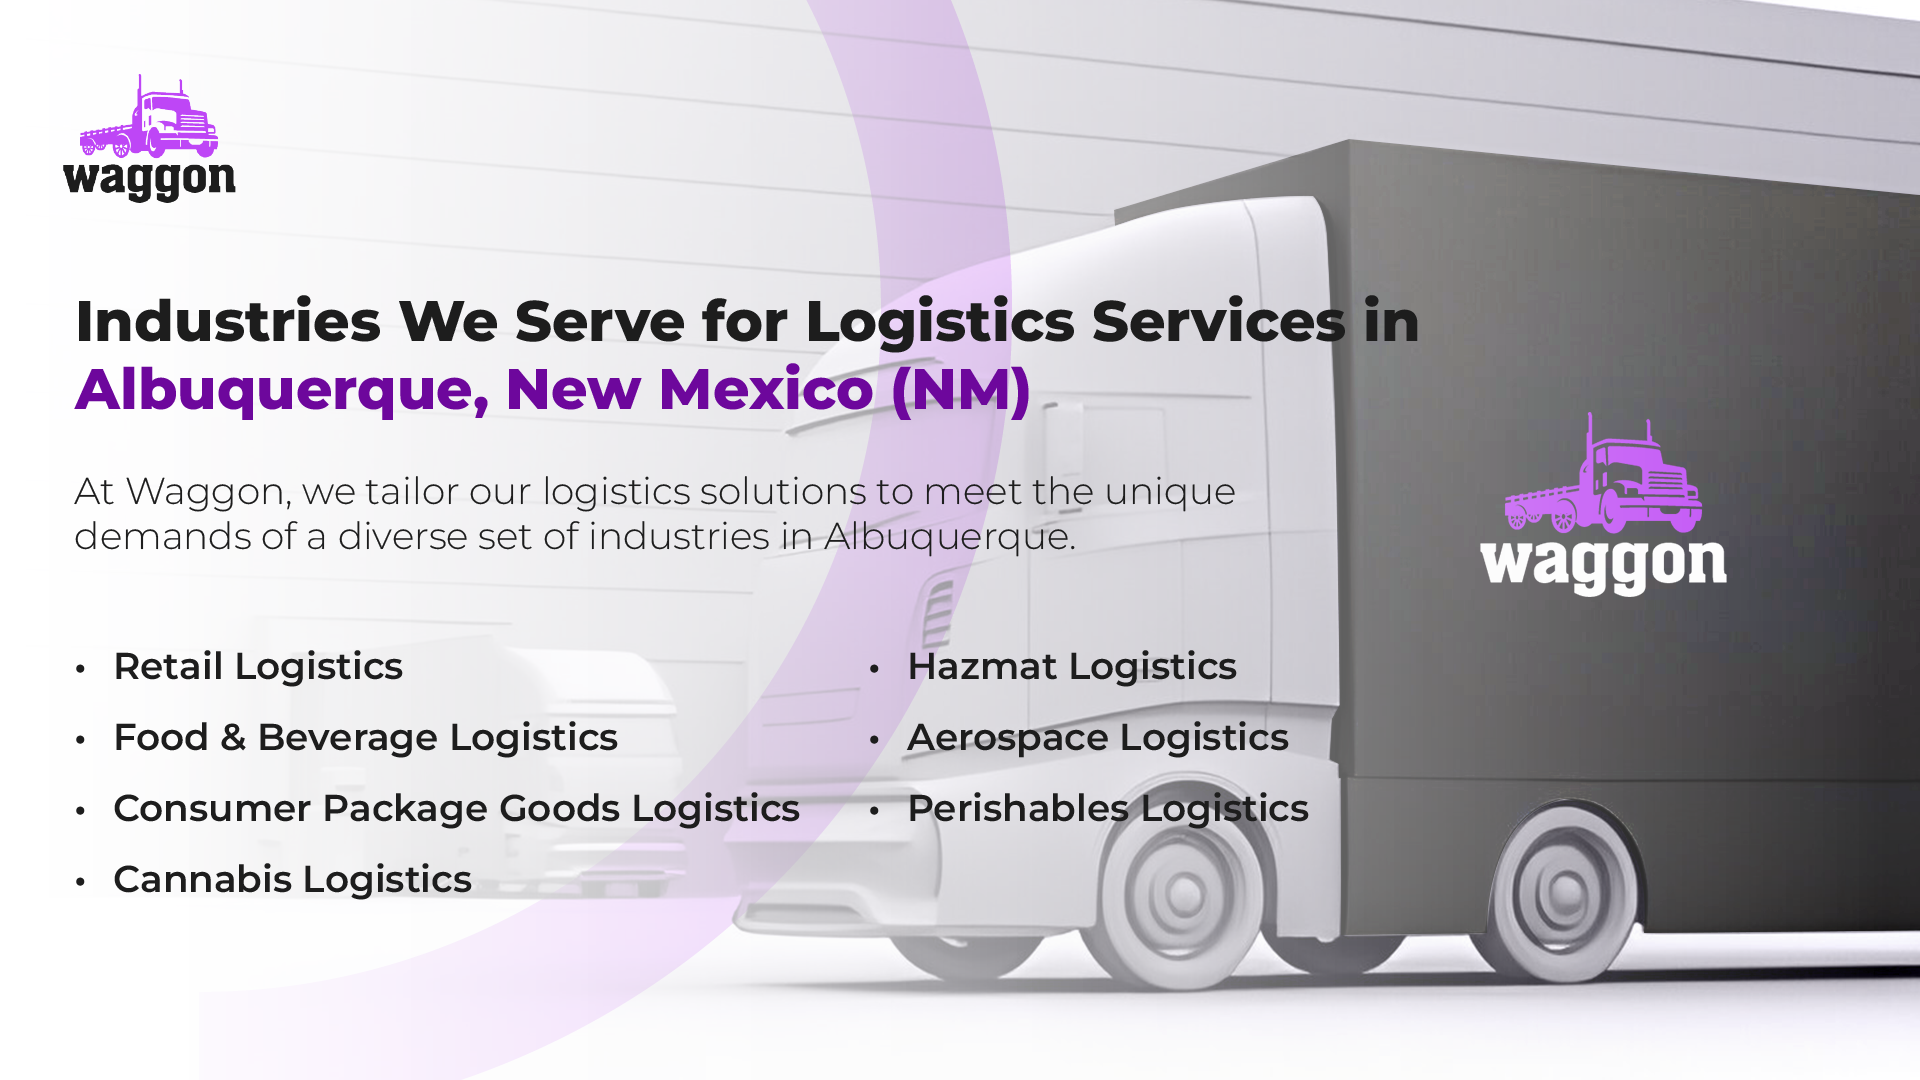 Industries We Serve for Logistics Services in Albuquerque, New Mexico (NM)